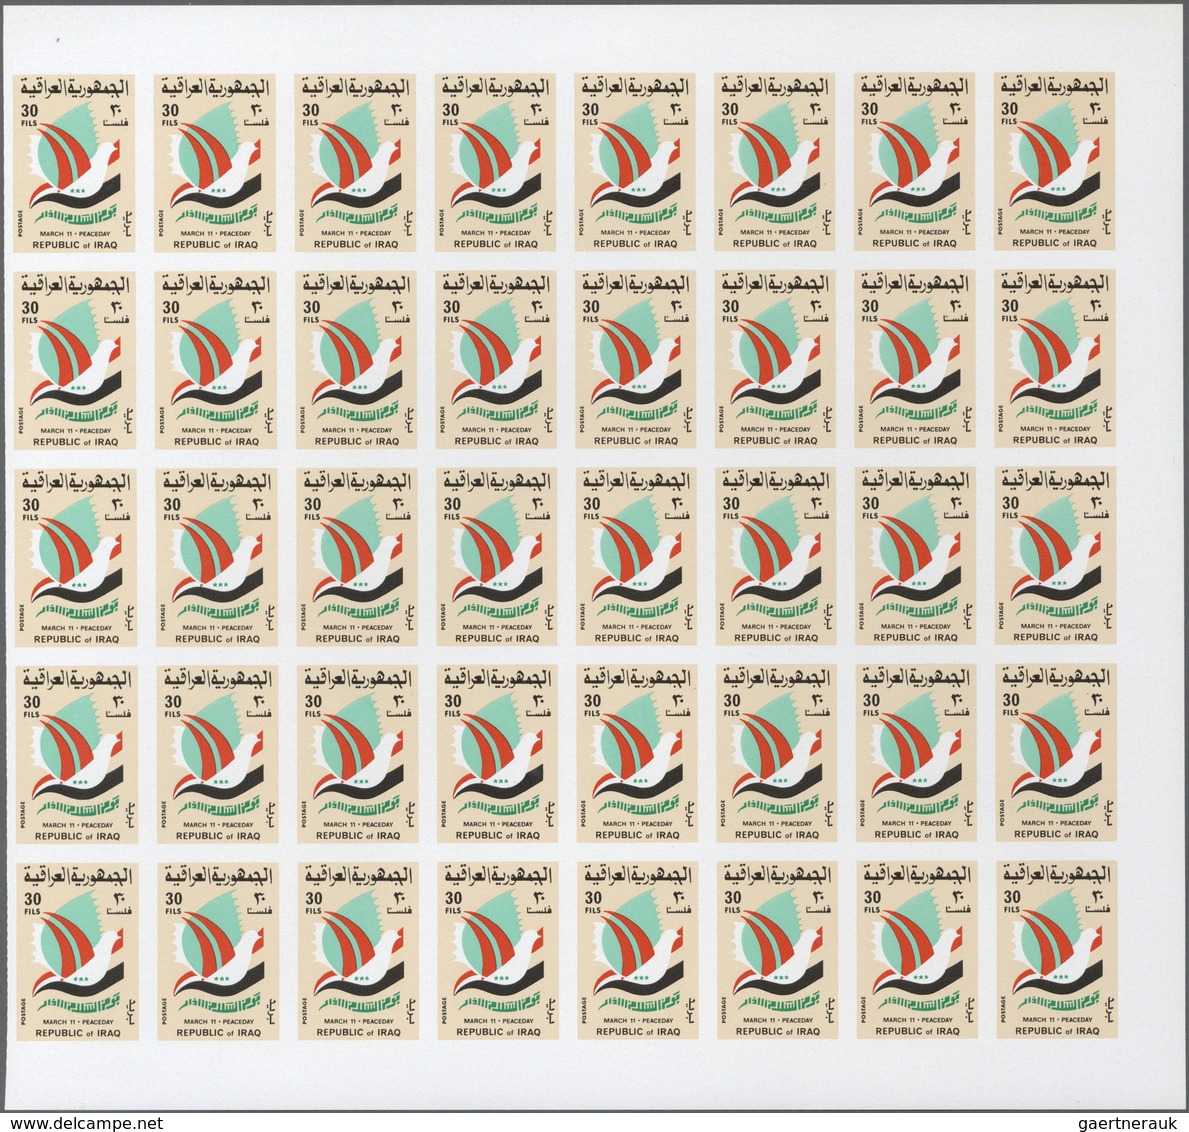 Irak: 1975/1983. Lot of in all 3.455 IMPERFORATE STAMPS (in part sheets mostly) showing various topi